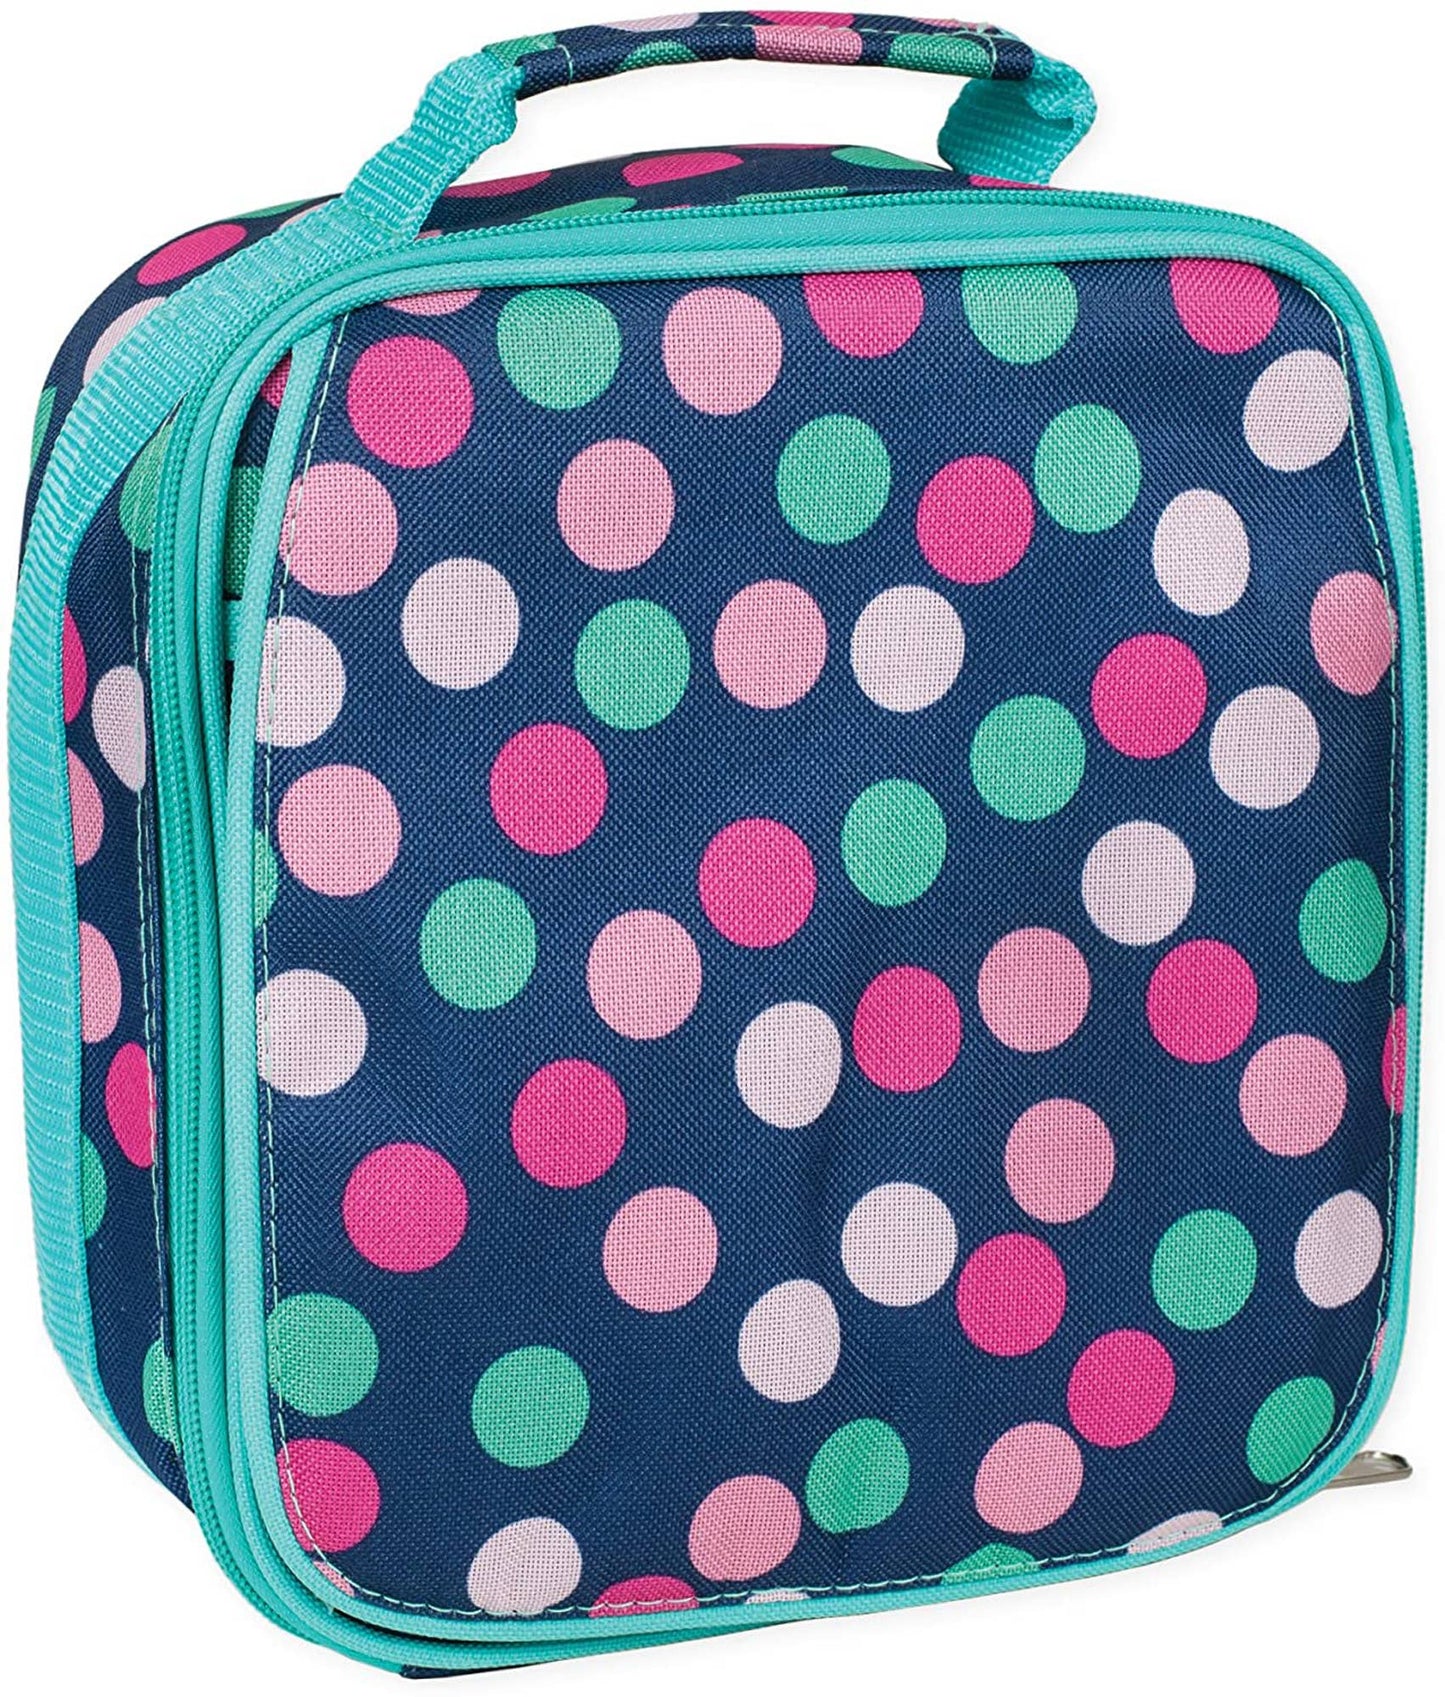 Teal Navy Party Polka Dot Insulated Soft Cooler Lunch Bag